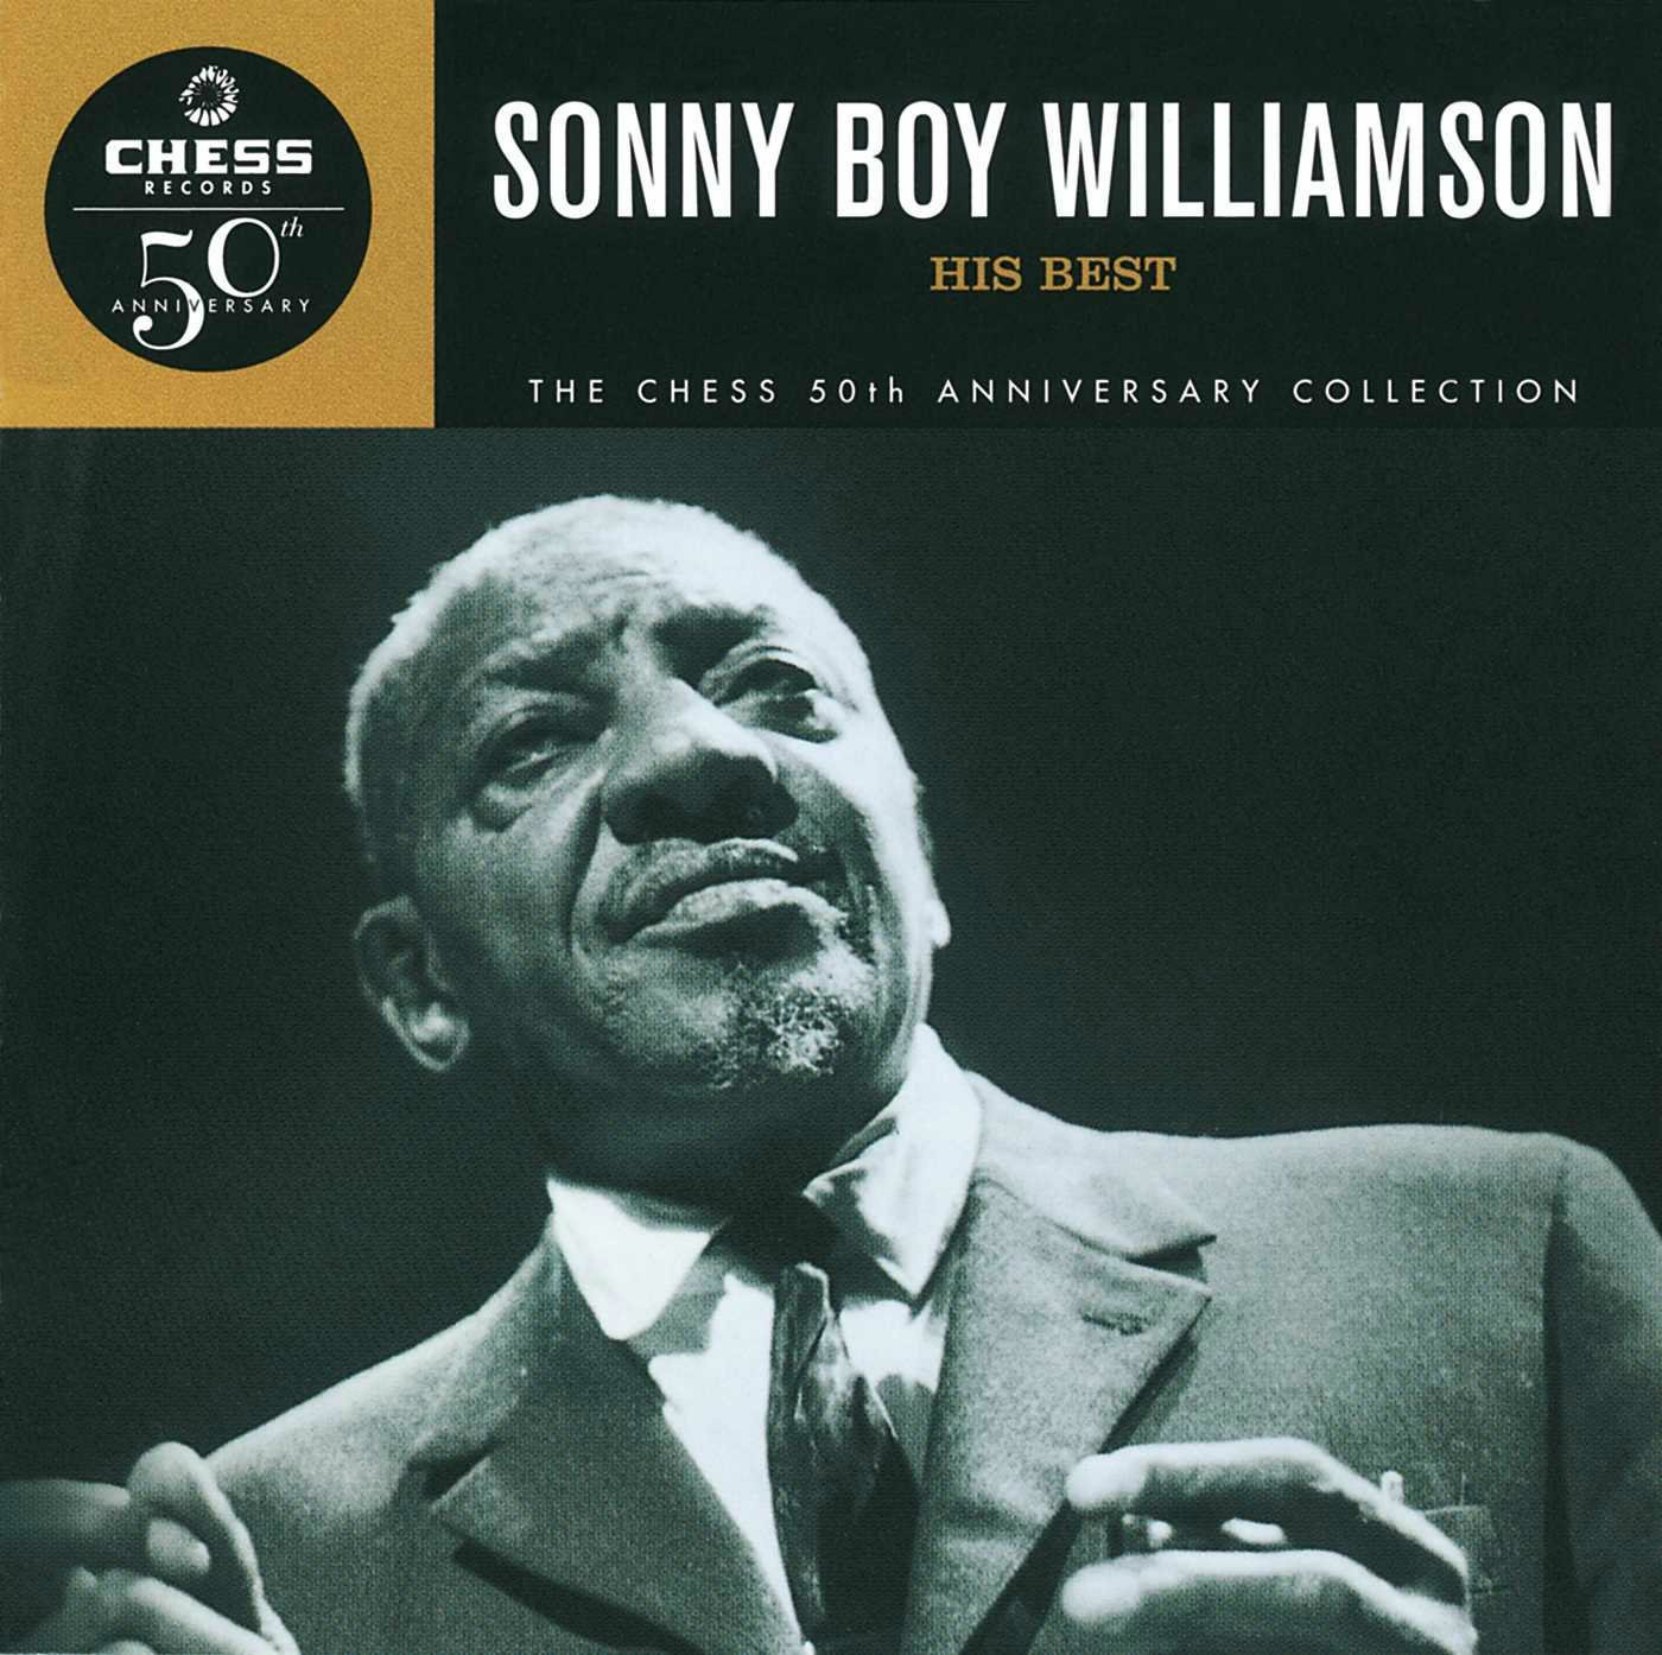 CD cover, Sonny Boy Williamson, Chess Records 50th Anniversary Collection.